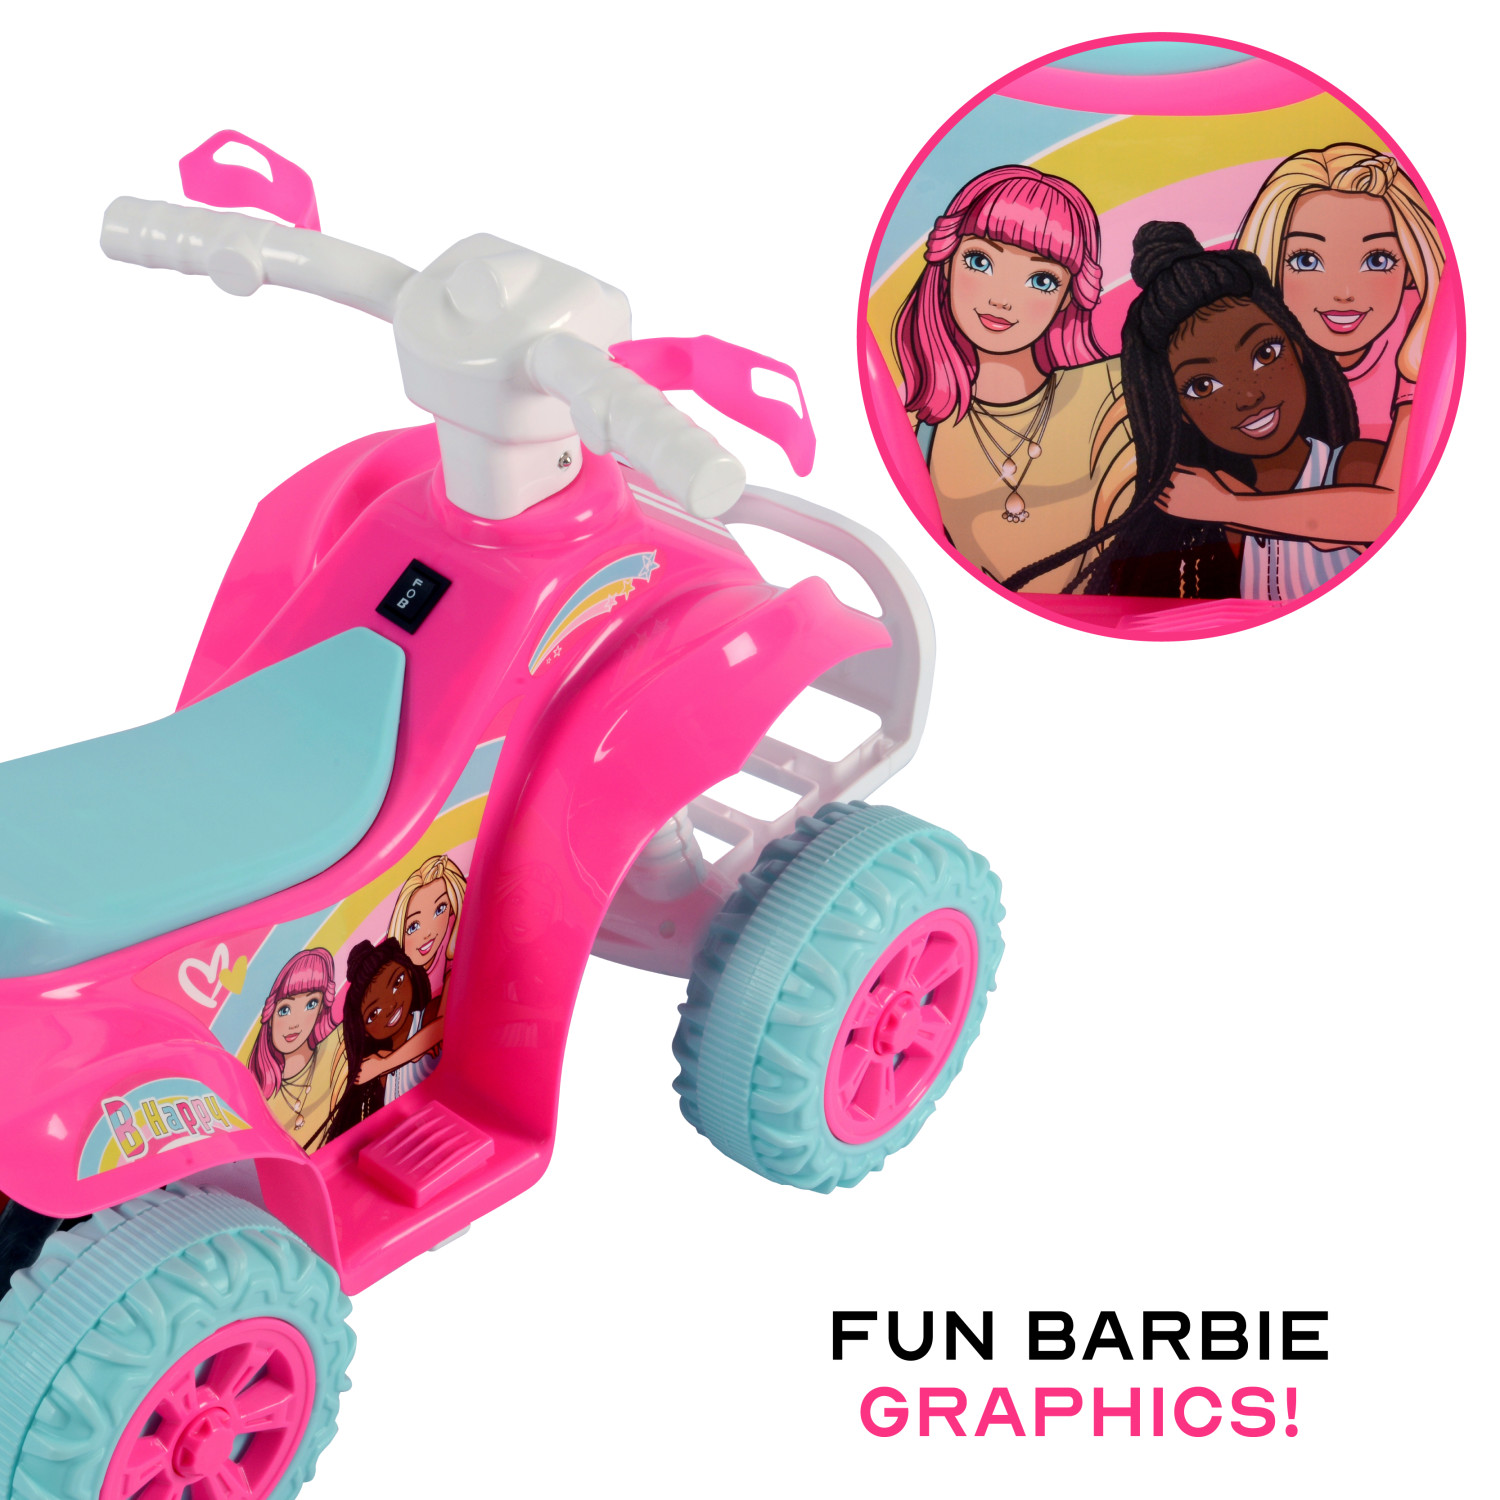 Licensed Barbie 6V Battery Powered Ride on ATV for Kids Ages 2-5 Years Old, Pink - image 4 of 13